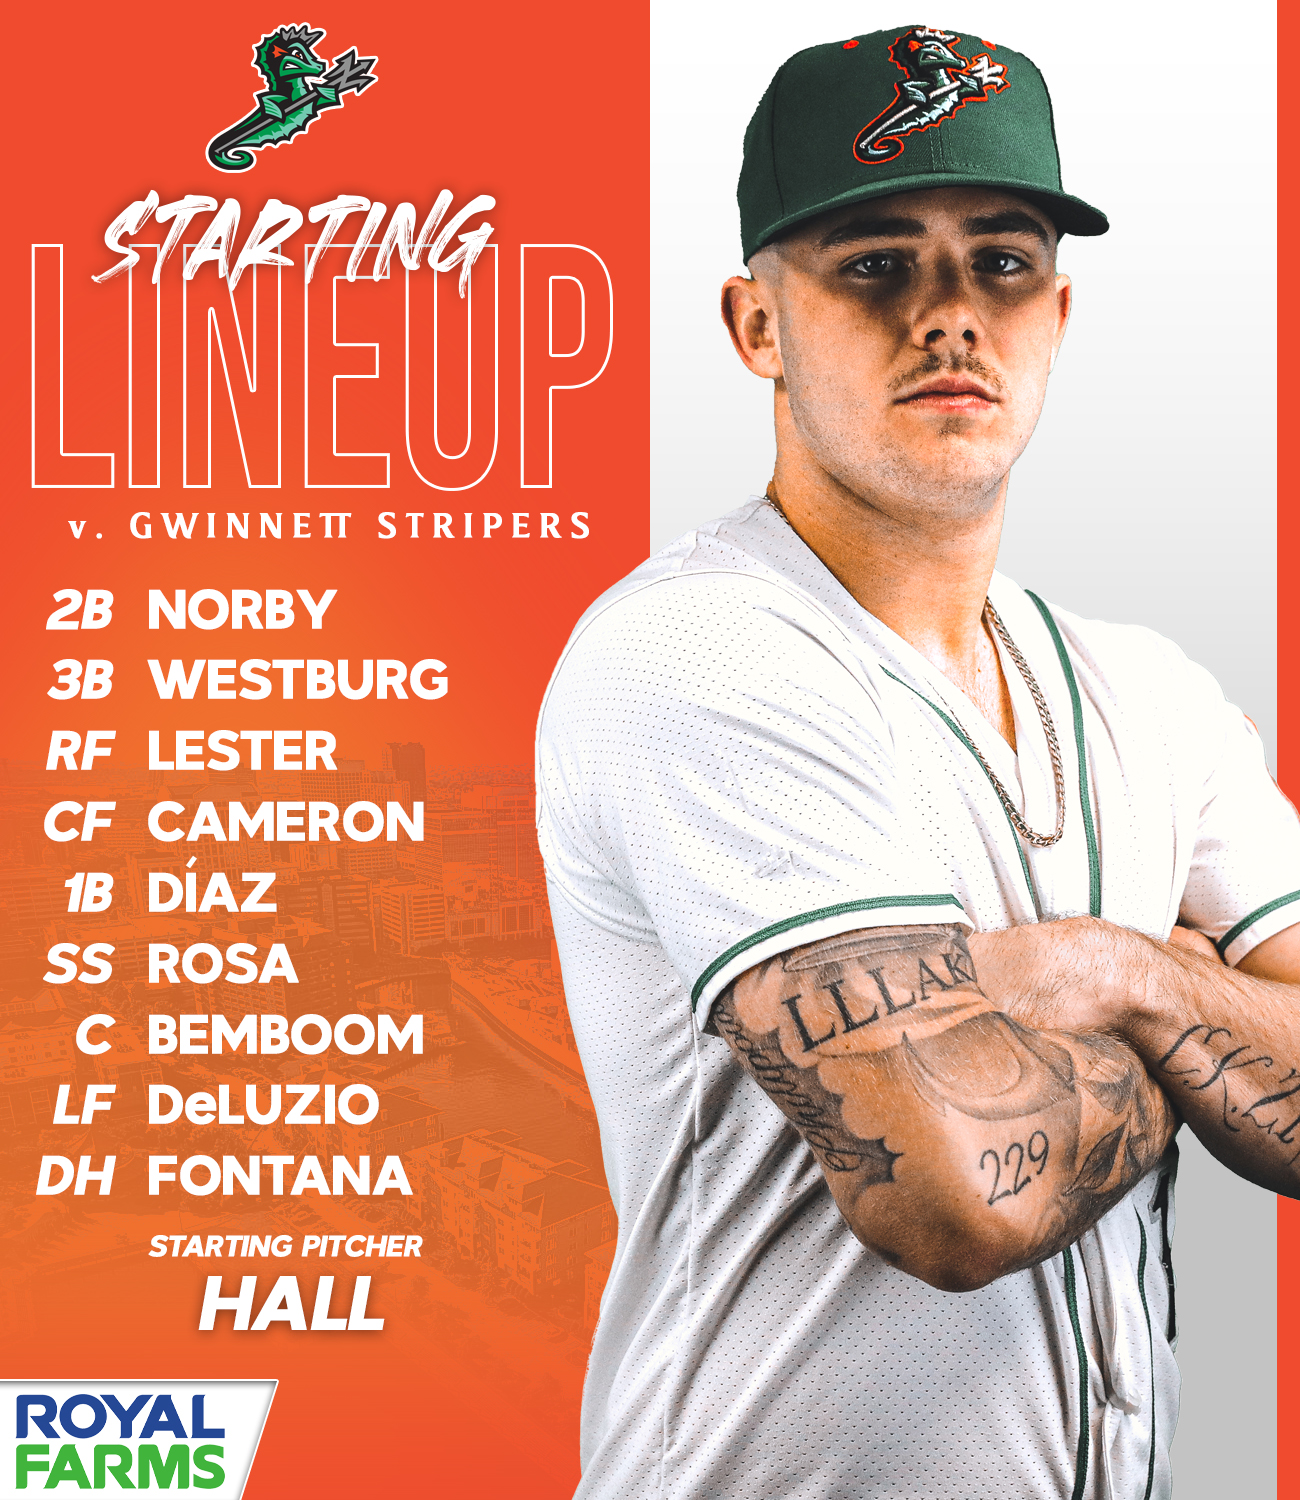 Our starting lineup for tonight's game - Gwinnett Stripers